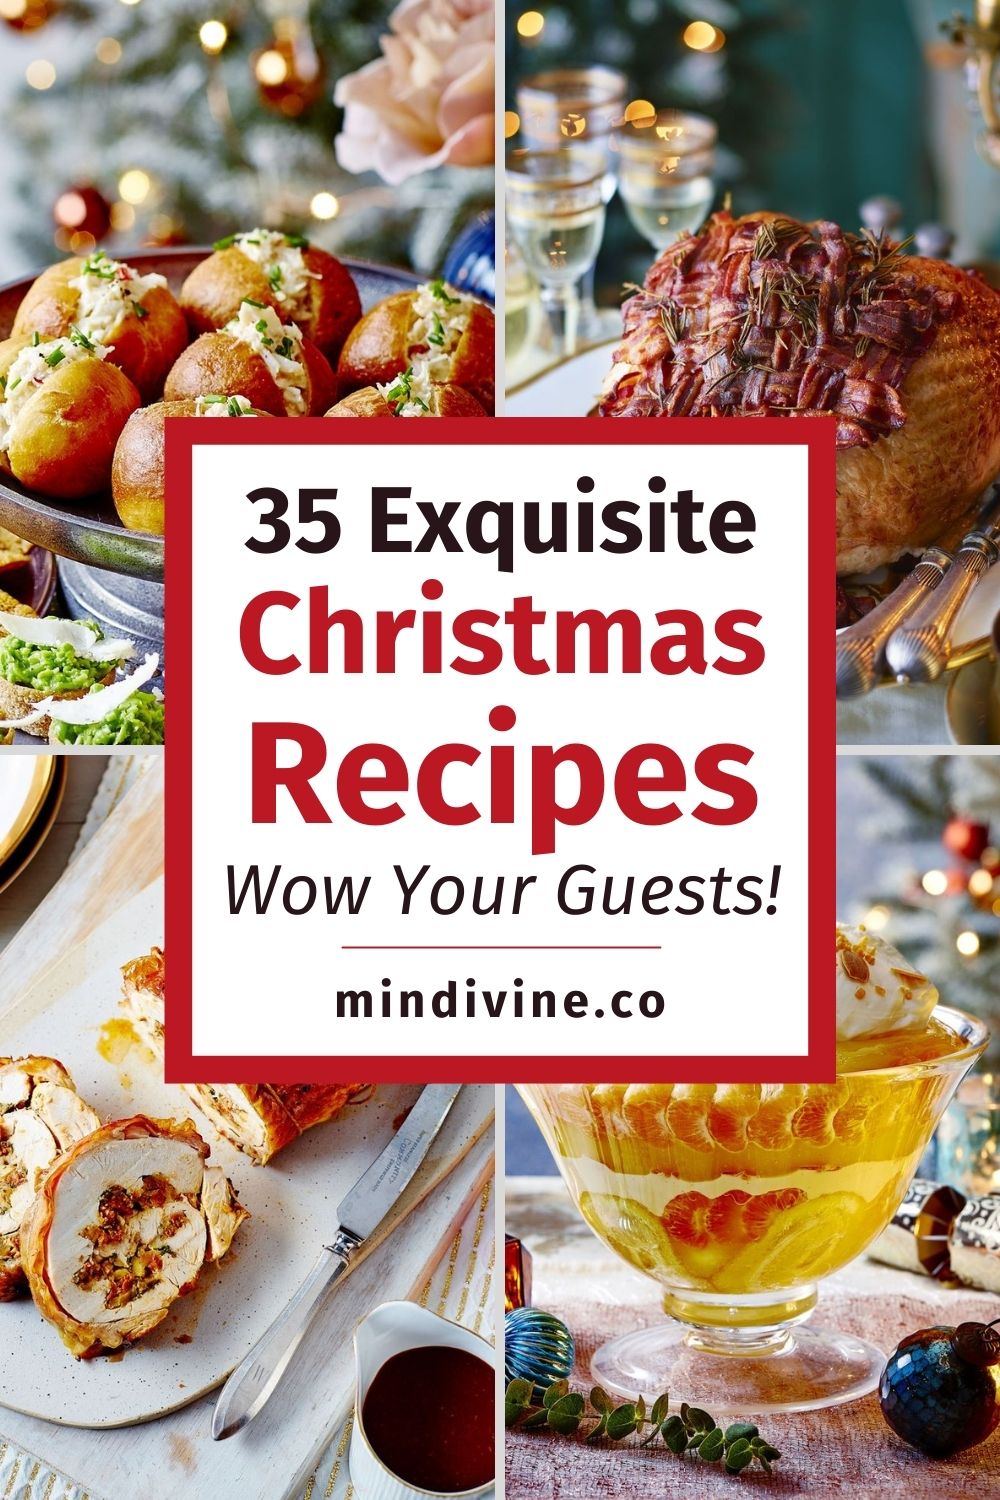 4 Pictures of delicious Christmas recipes.